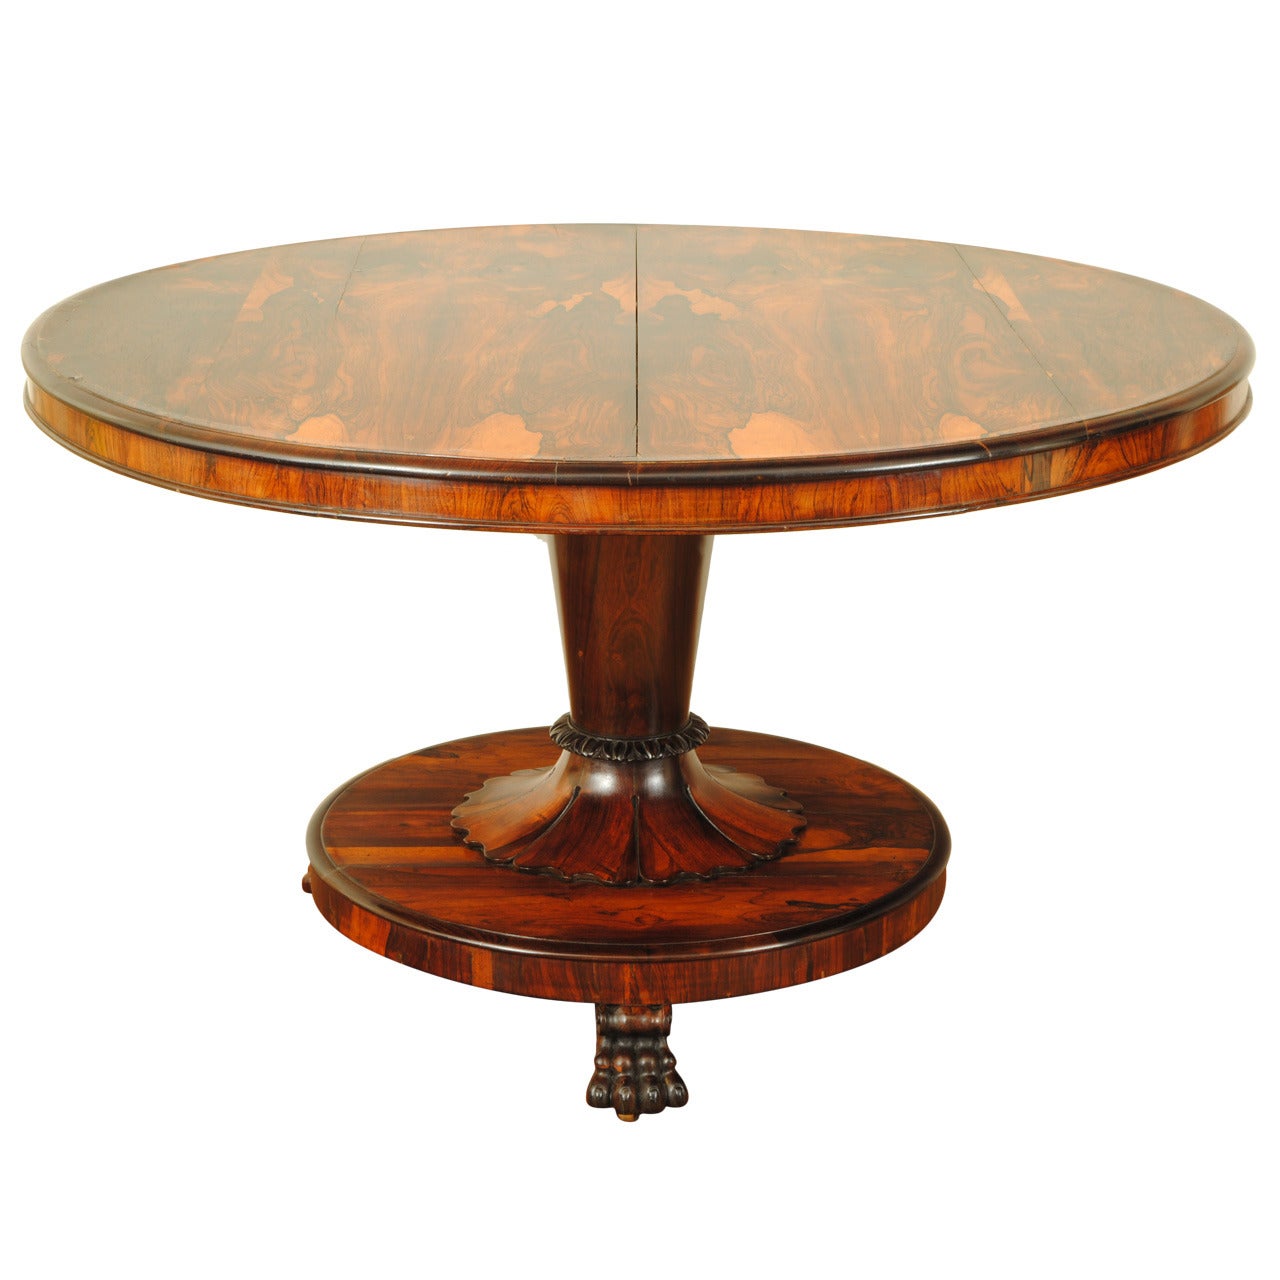 English William IV Rosewood Tilt-Top Center Table, 19th Century